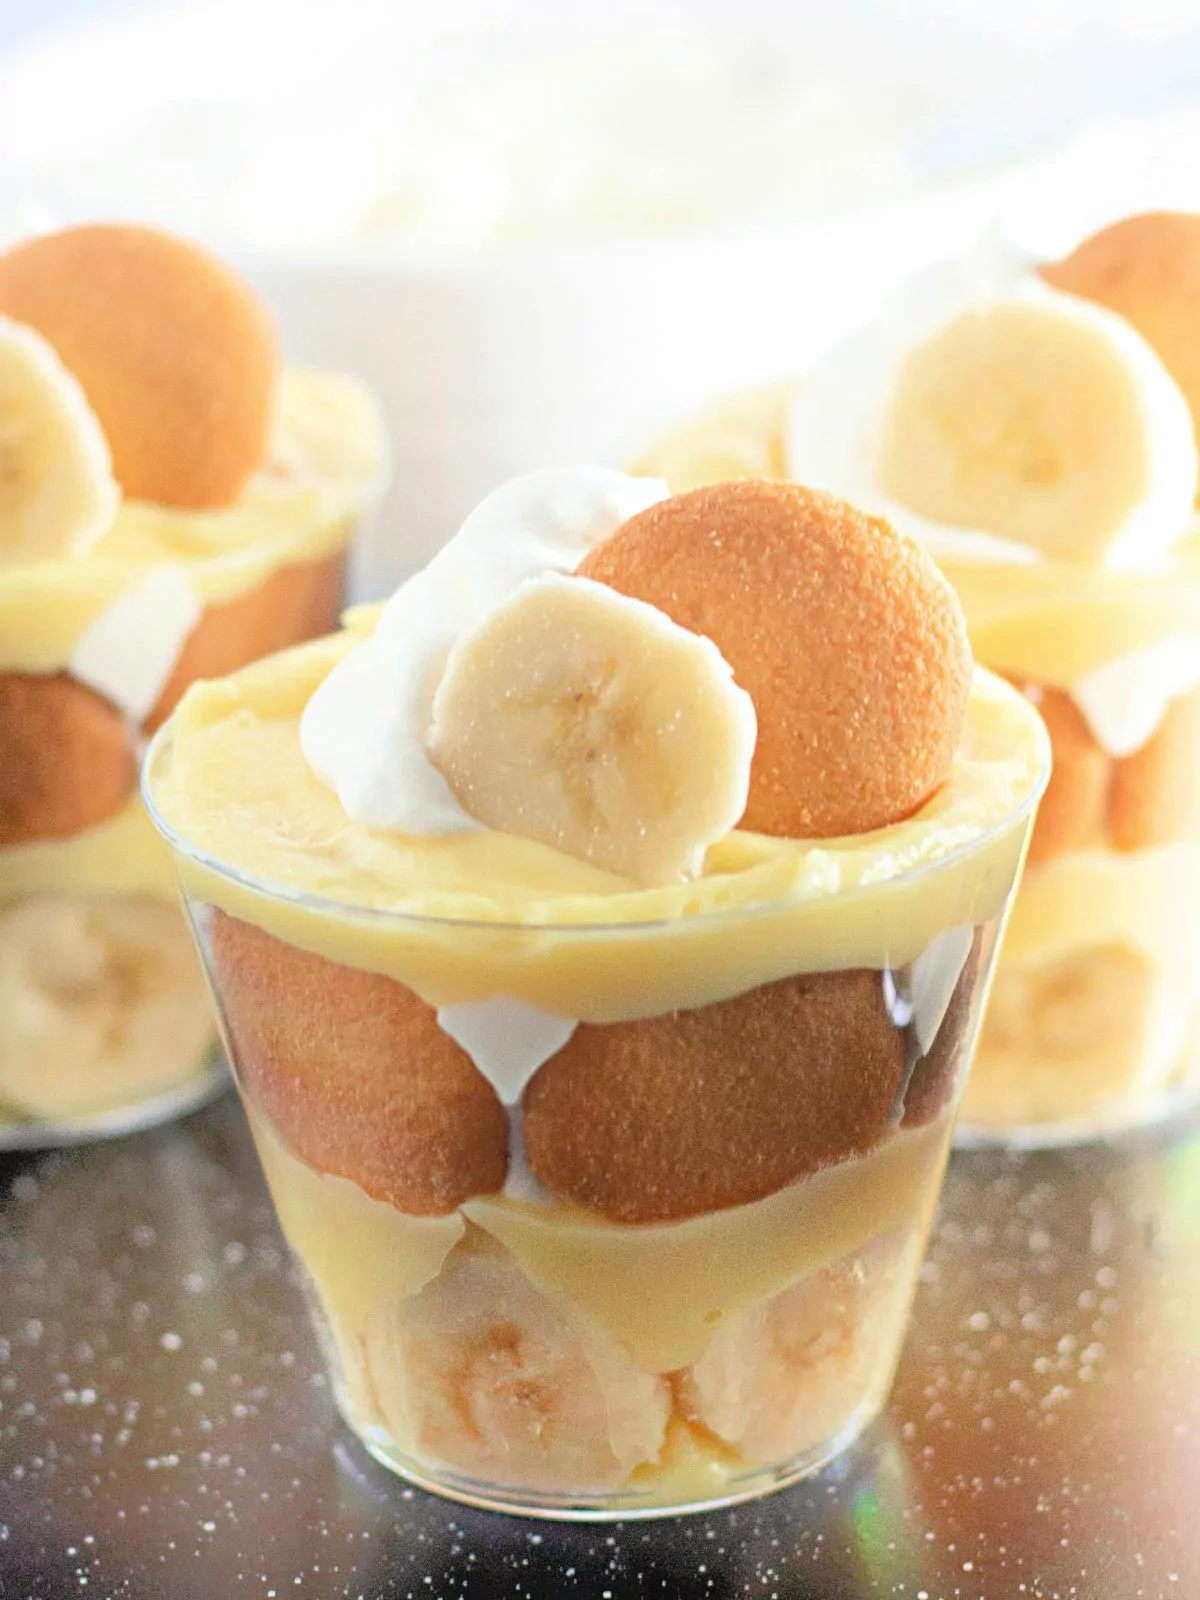 Banana pudding cups topped with sliced bananas and whipped cream.